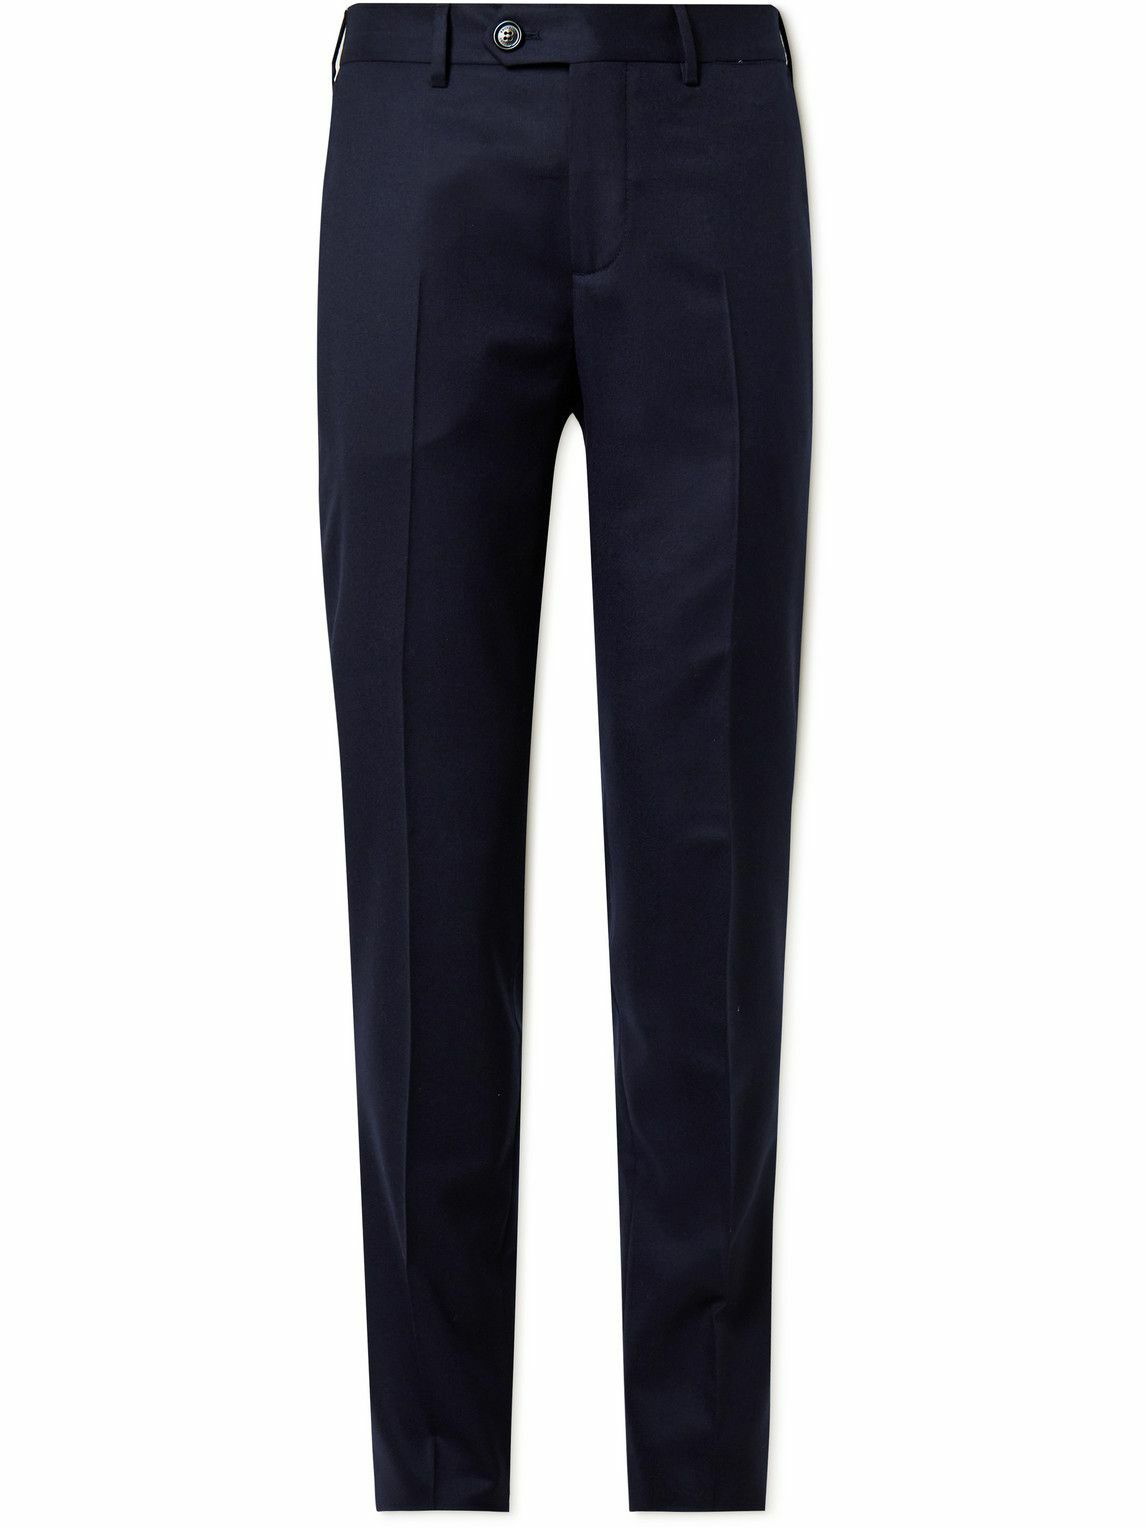 Brunello Cucinelli - Slim-Fit Tapered Virgin Wool Trousers - Blue ...